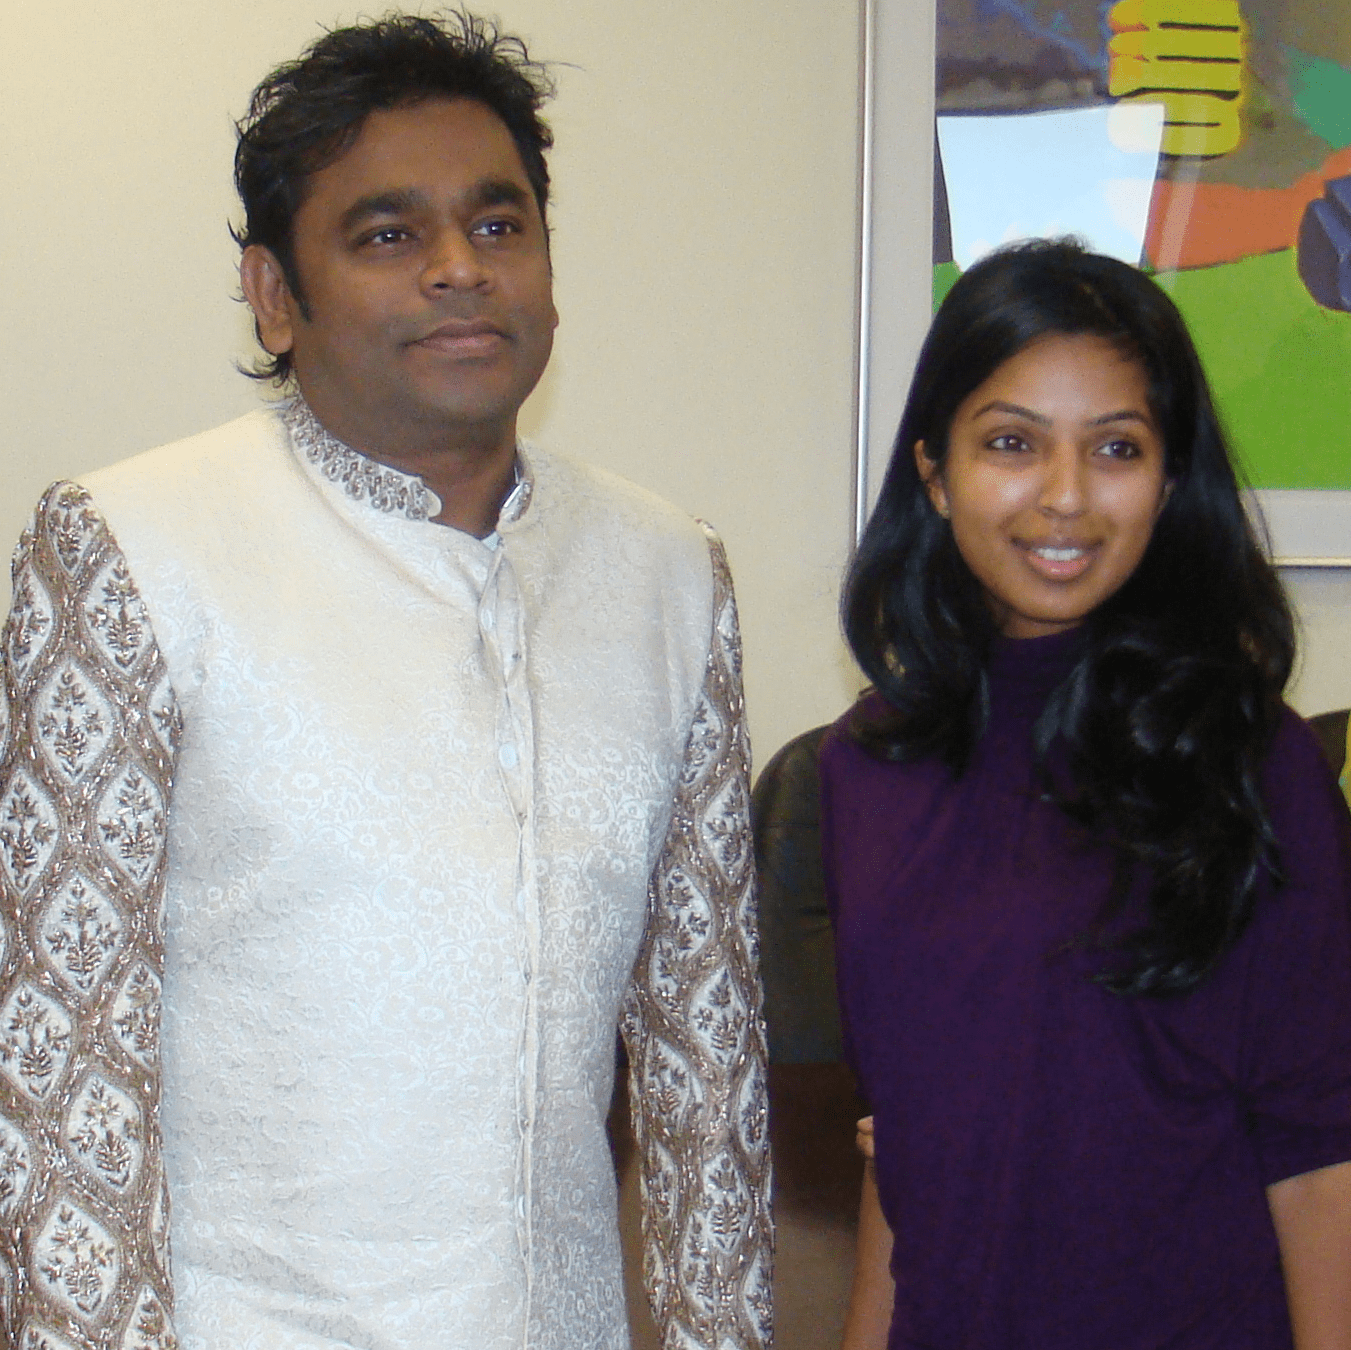 Creative director and founder of Dance Expression Studio, Neha with iconic Bollywood Composer, A R Rahman.